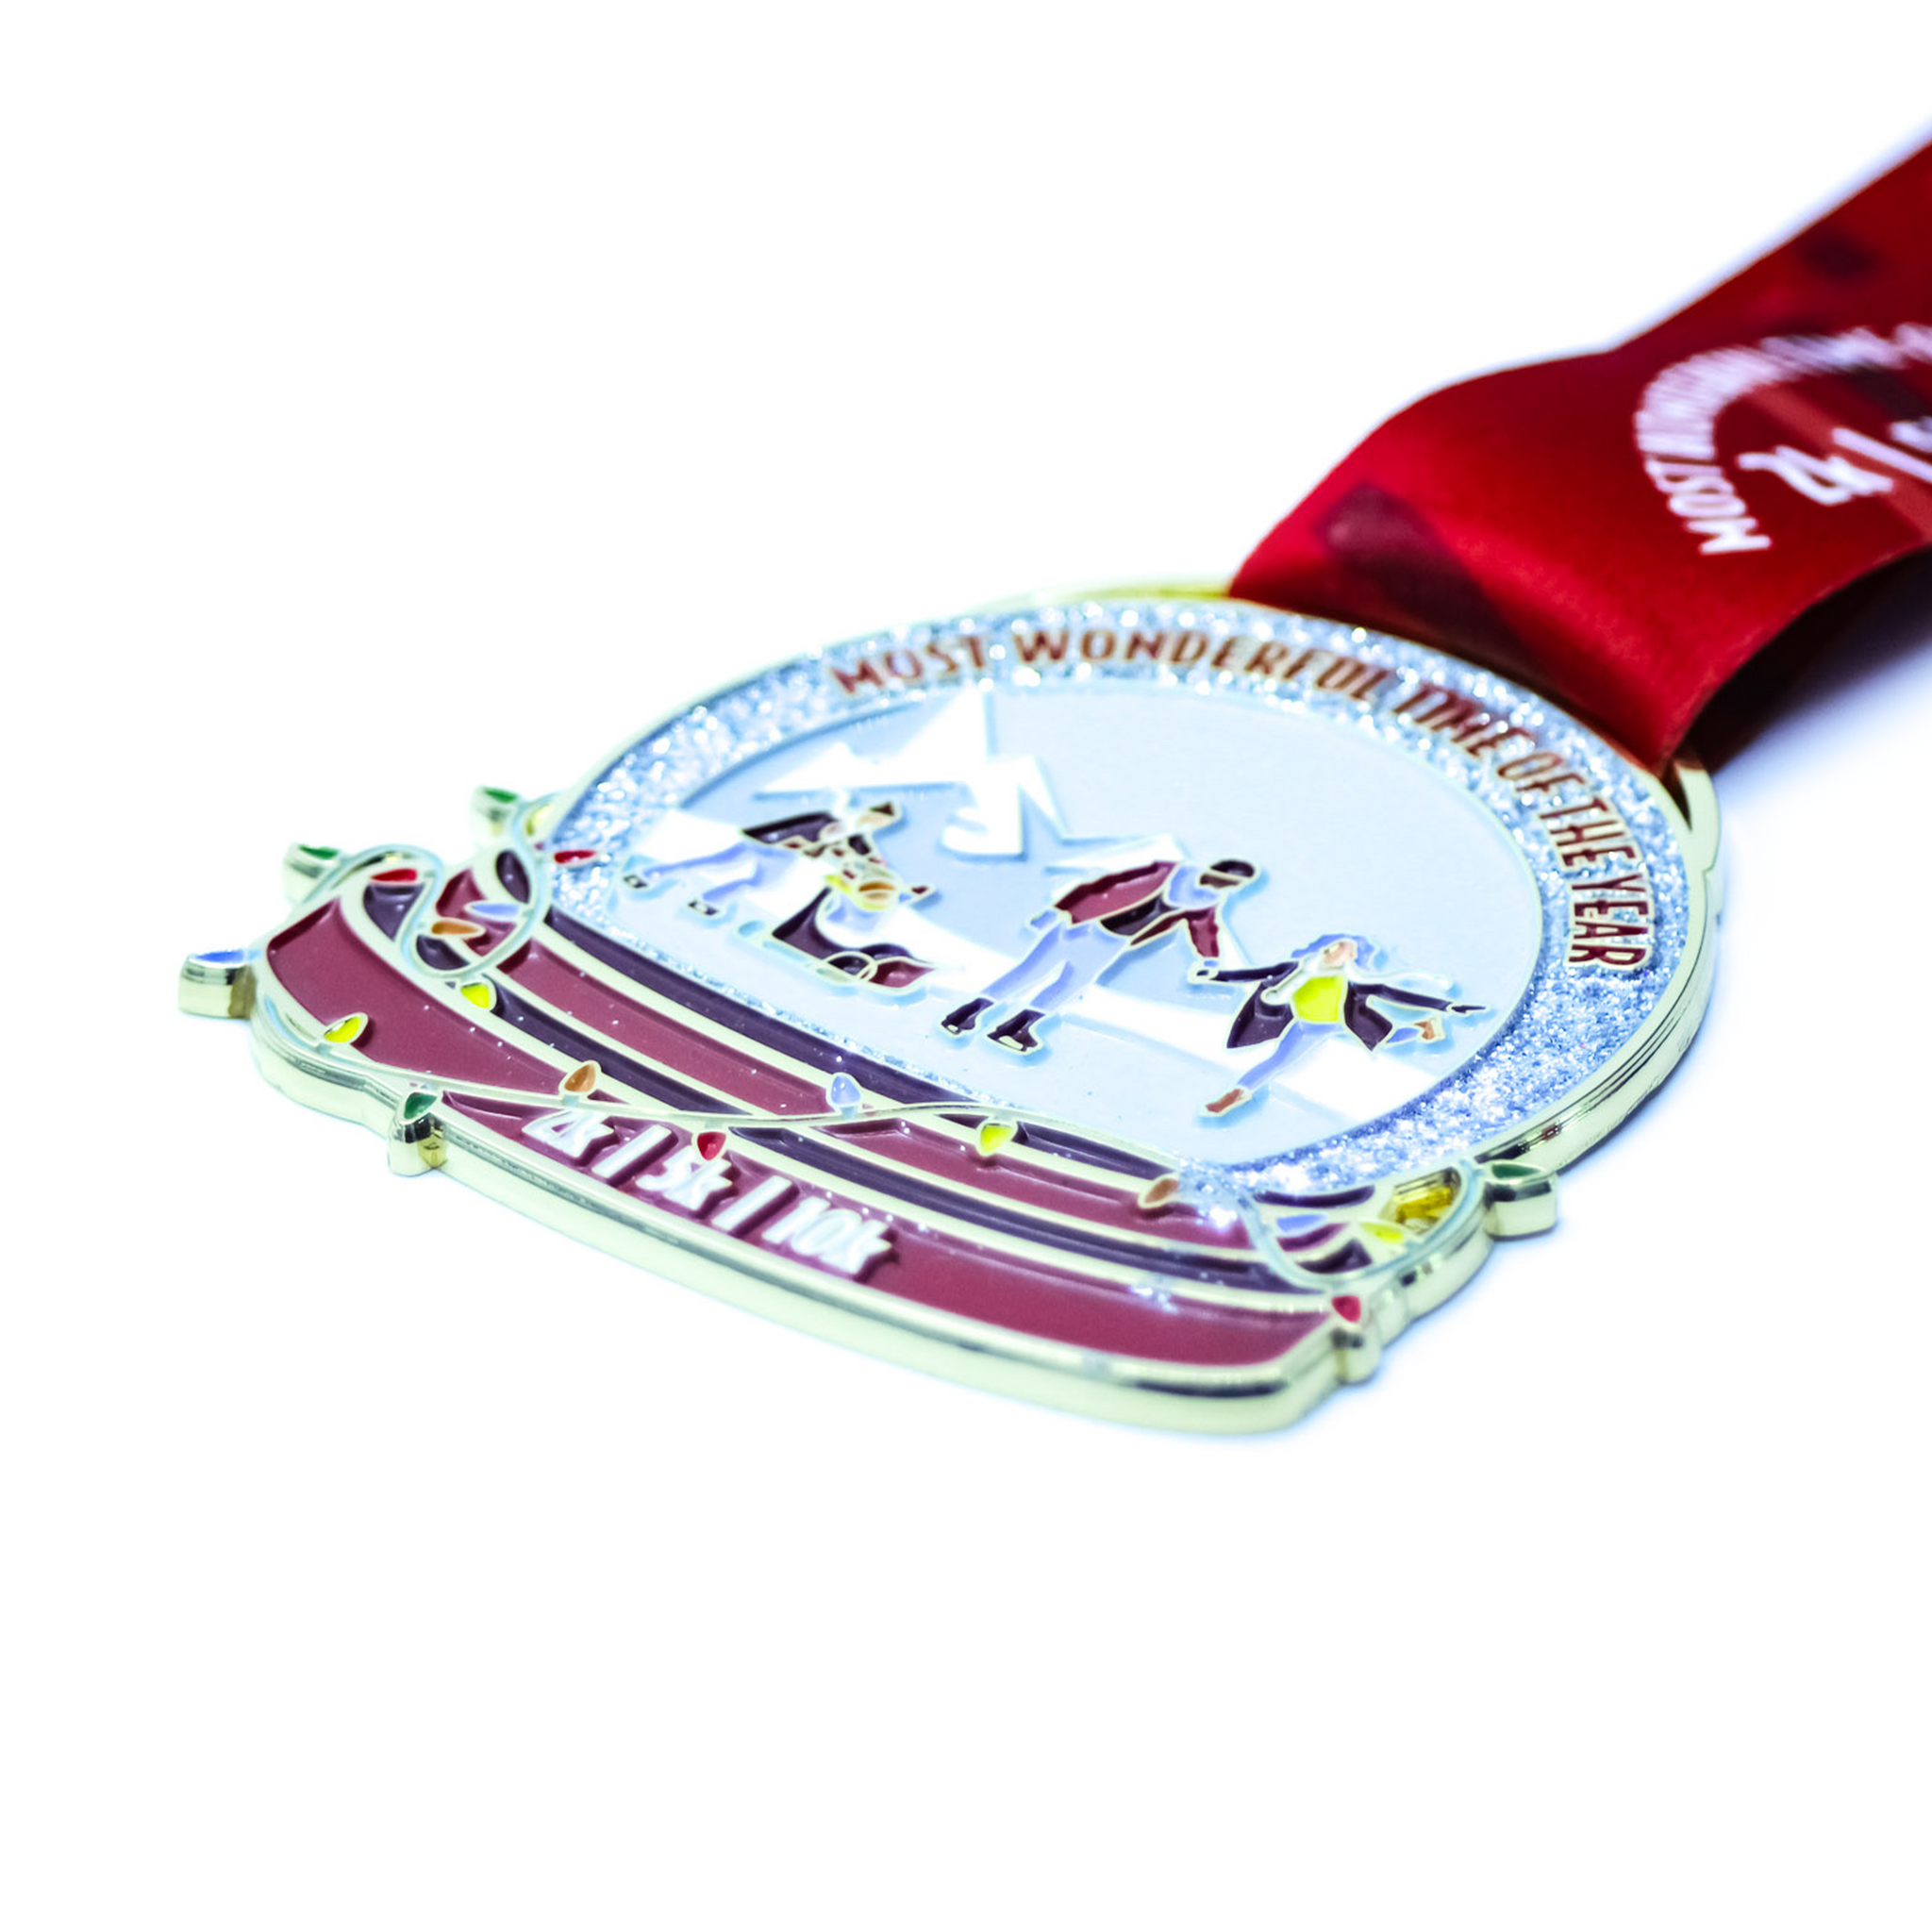 Most Wonderful Time Of The Year 2k | 5k | 10k - Entry + Medal